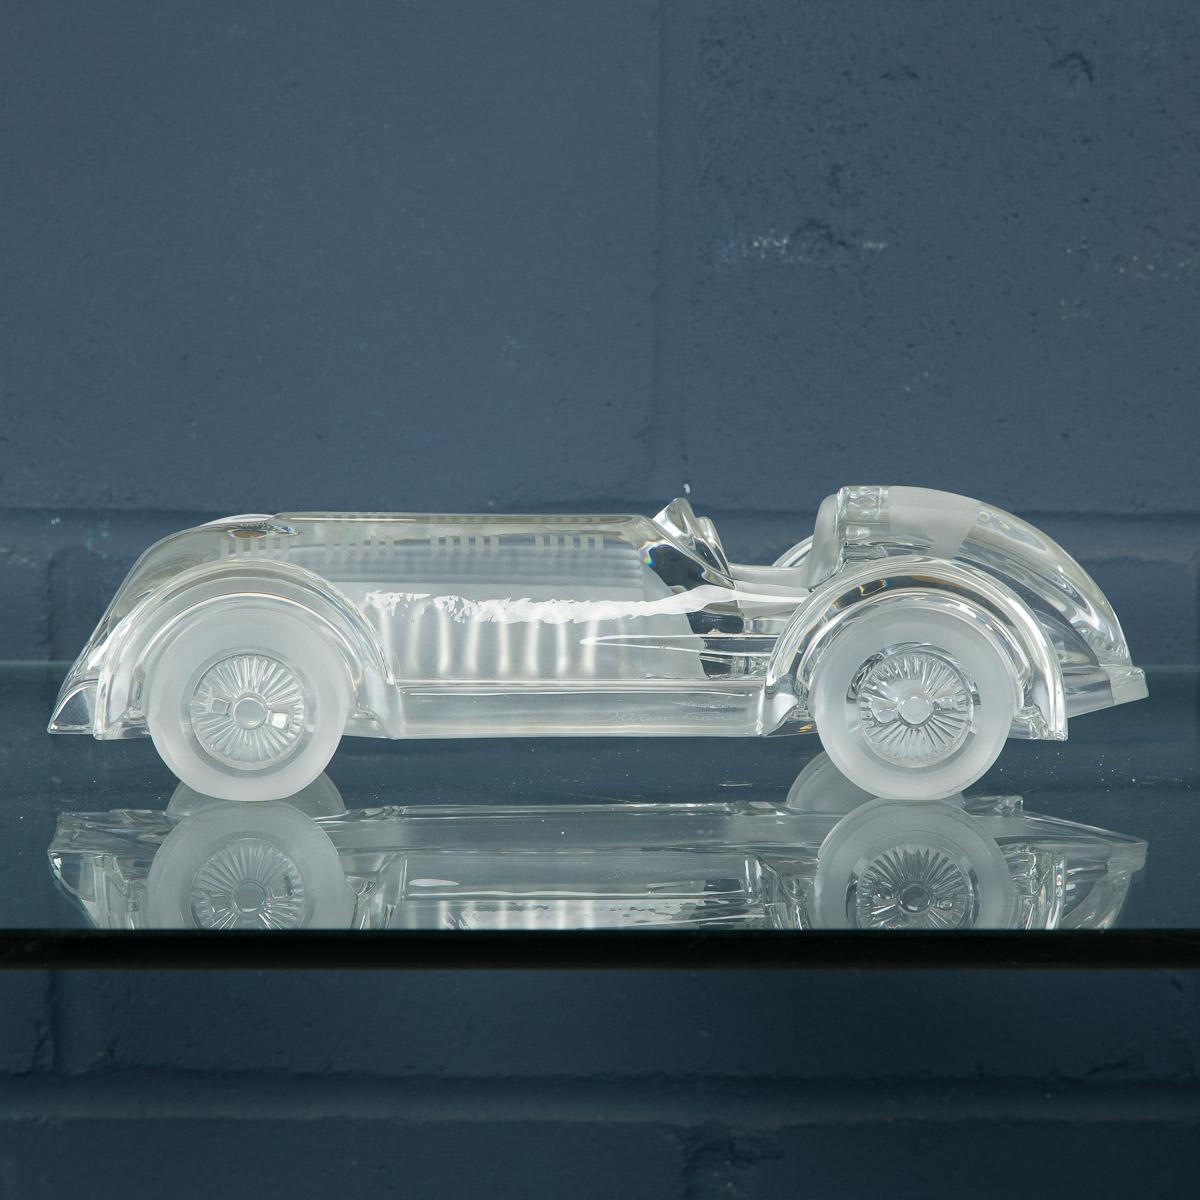 A rare model race car designed by Xavier Froissart and realized by Daum, France, circa 1985. A mixture of frosted and polished glass give a wonderful texture to this sculpture, recalling the lines of a Le Mans single seater race-car from the 1940s.